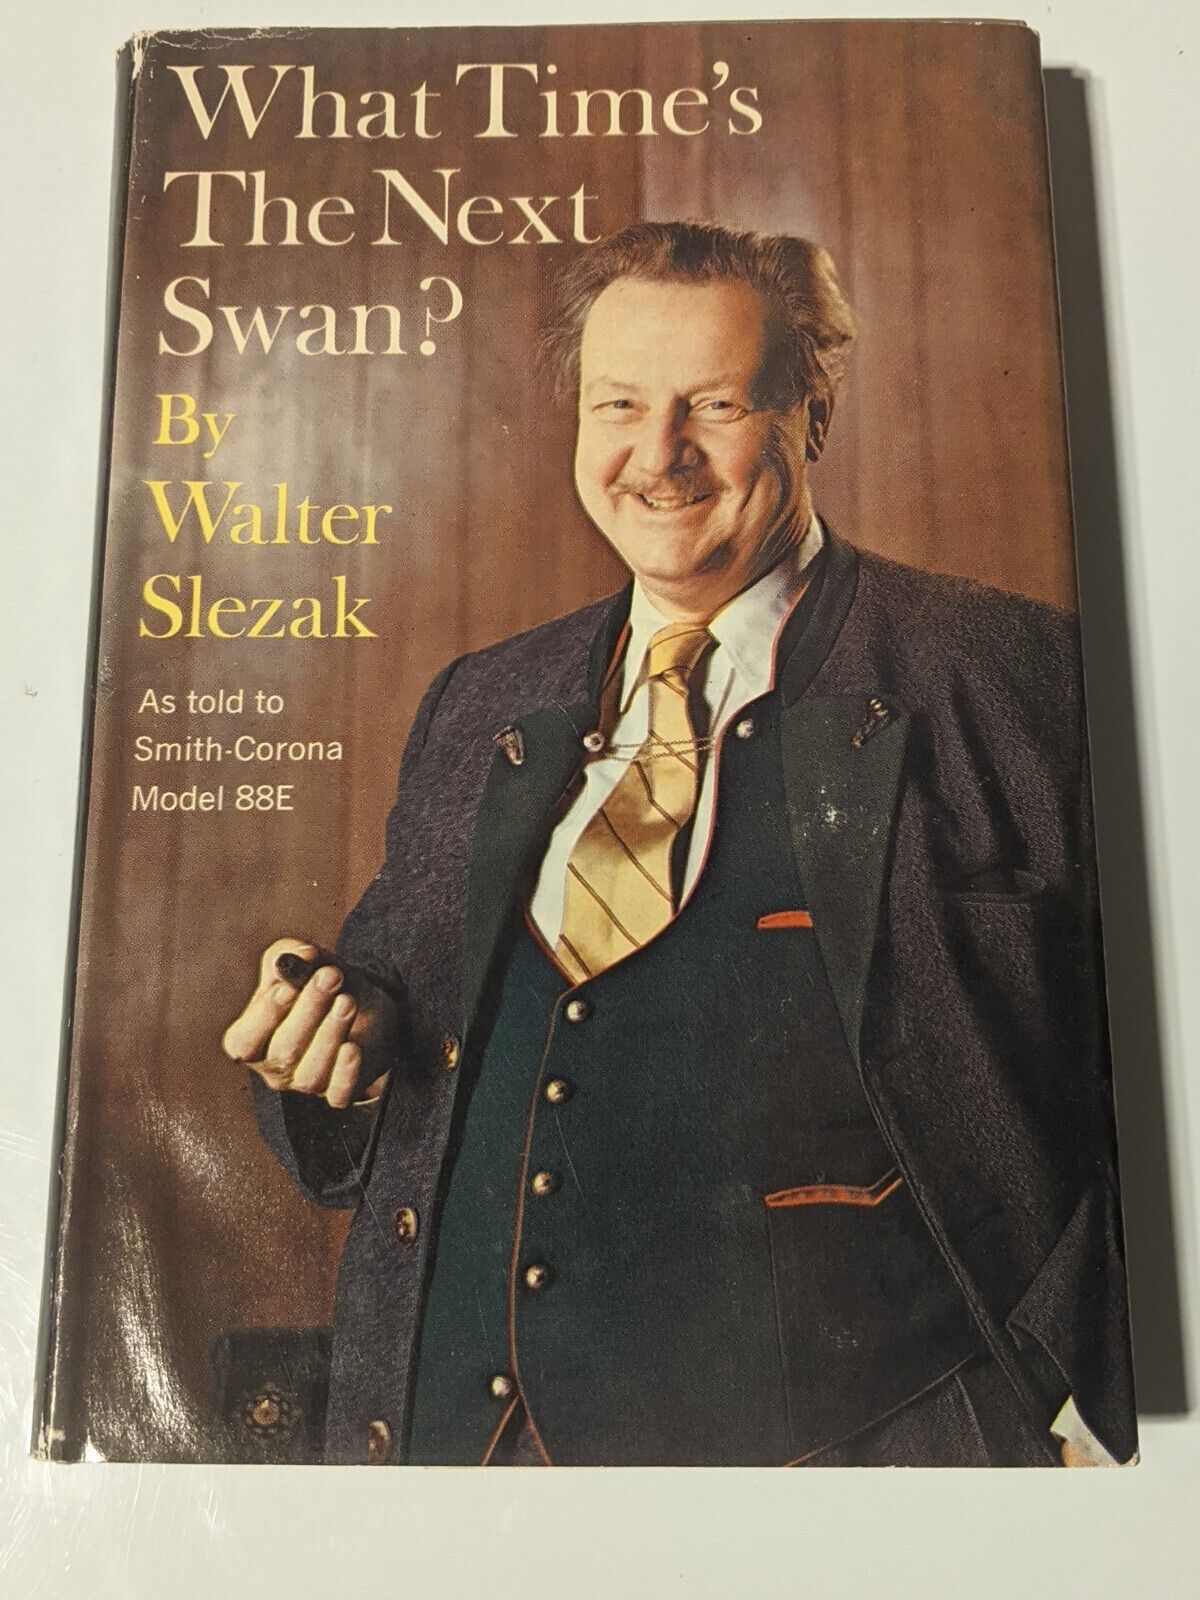 Vintage 1962 What Time\'s the Next Swan? by Walter Slezak